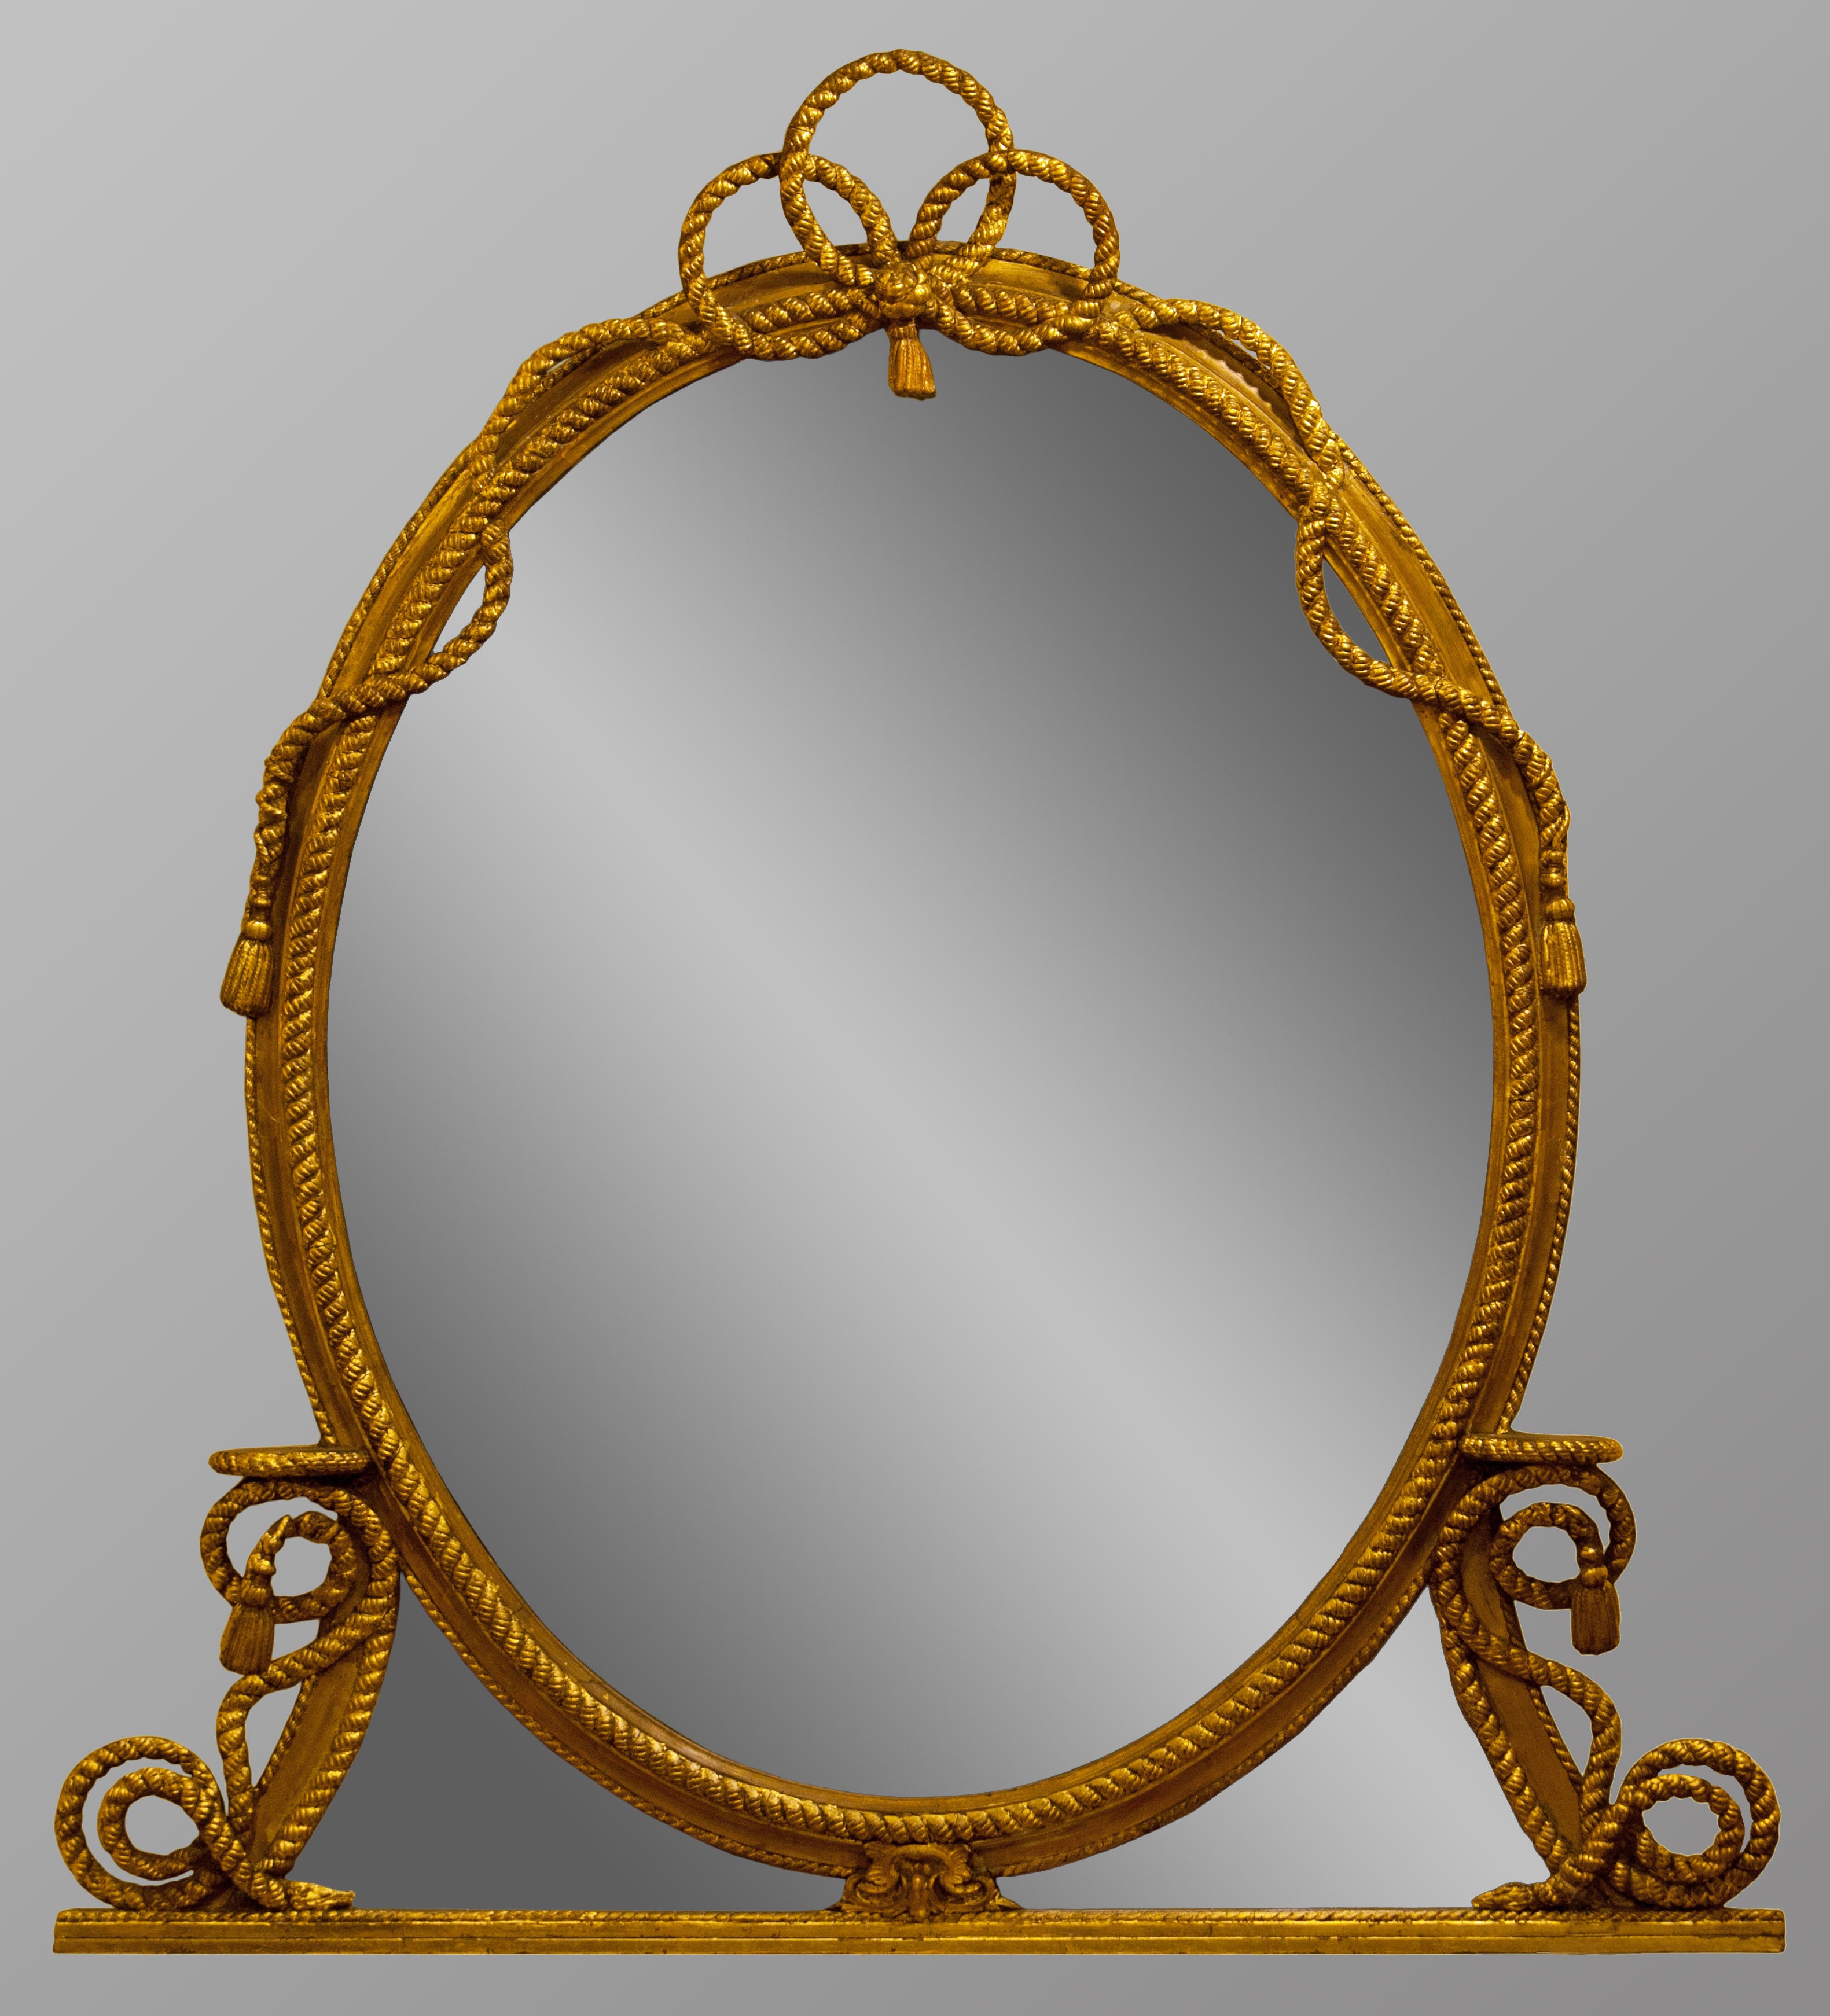 Gilt Oval Mid 19th Century Overmantle Mirror With Rope Decoration